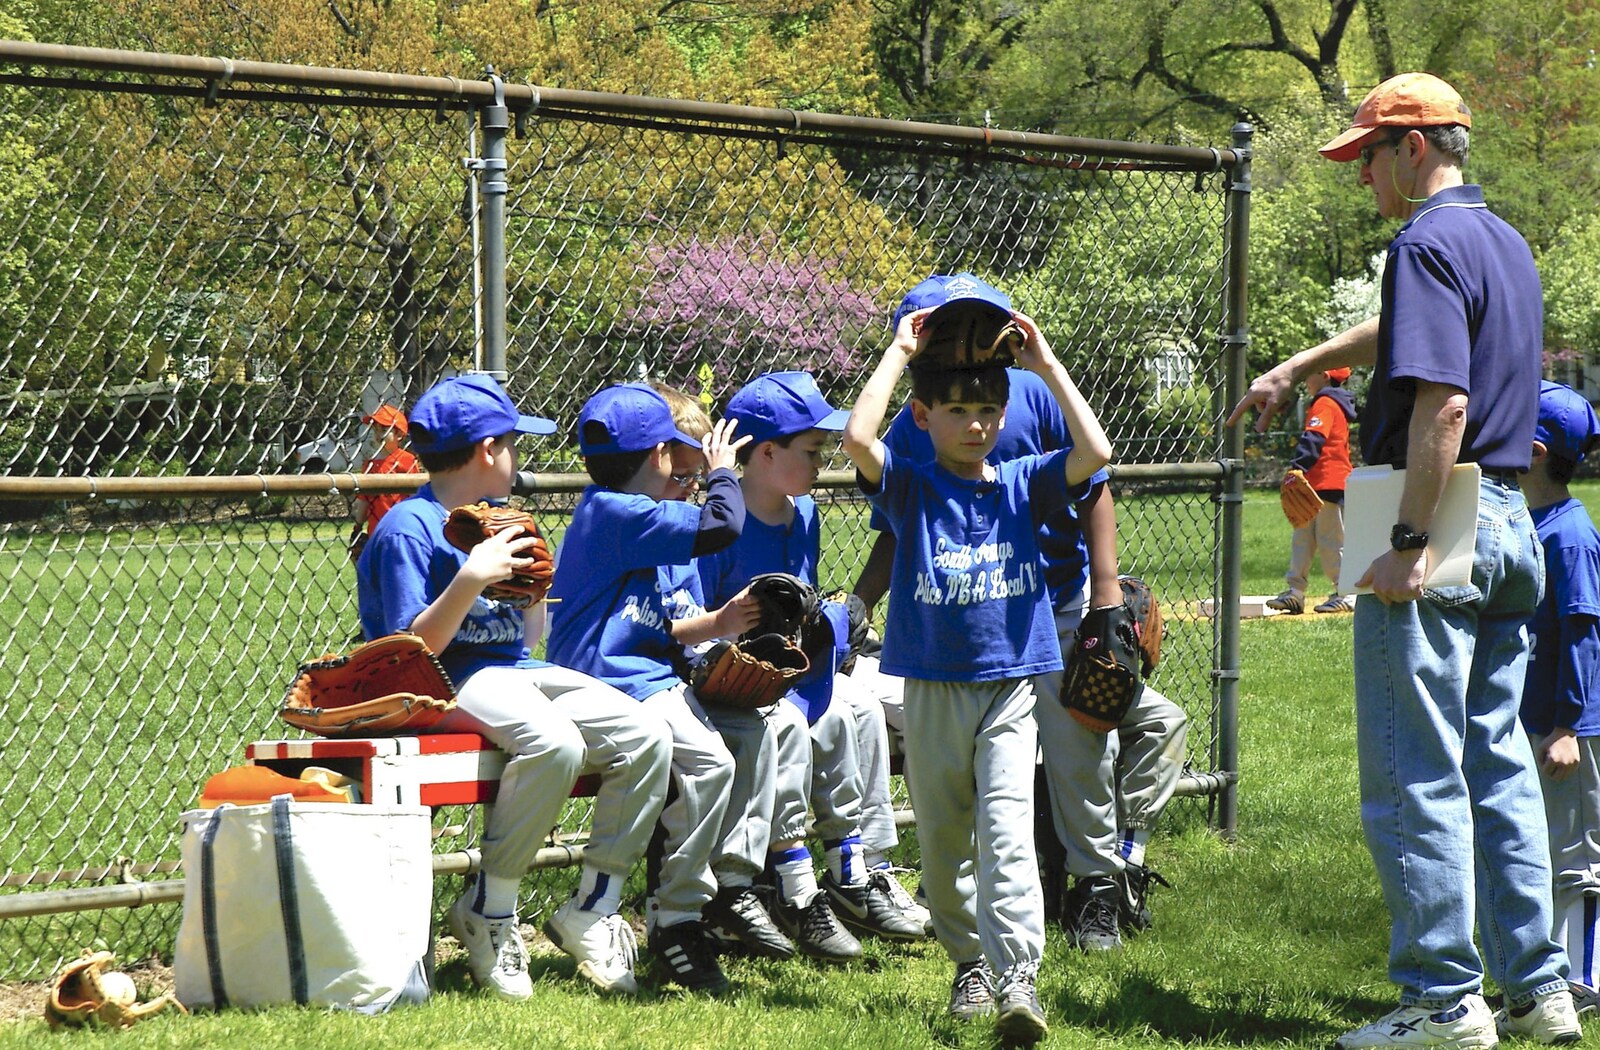 Kai sticks his cap on from Maplewood and Little-League Baseball, New Jersey - 29th April 2006